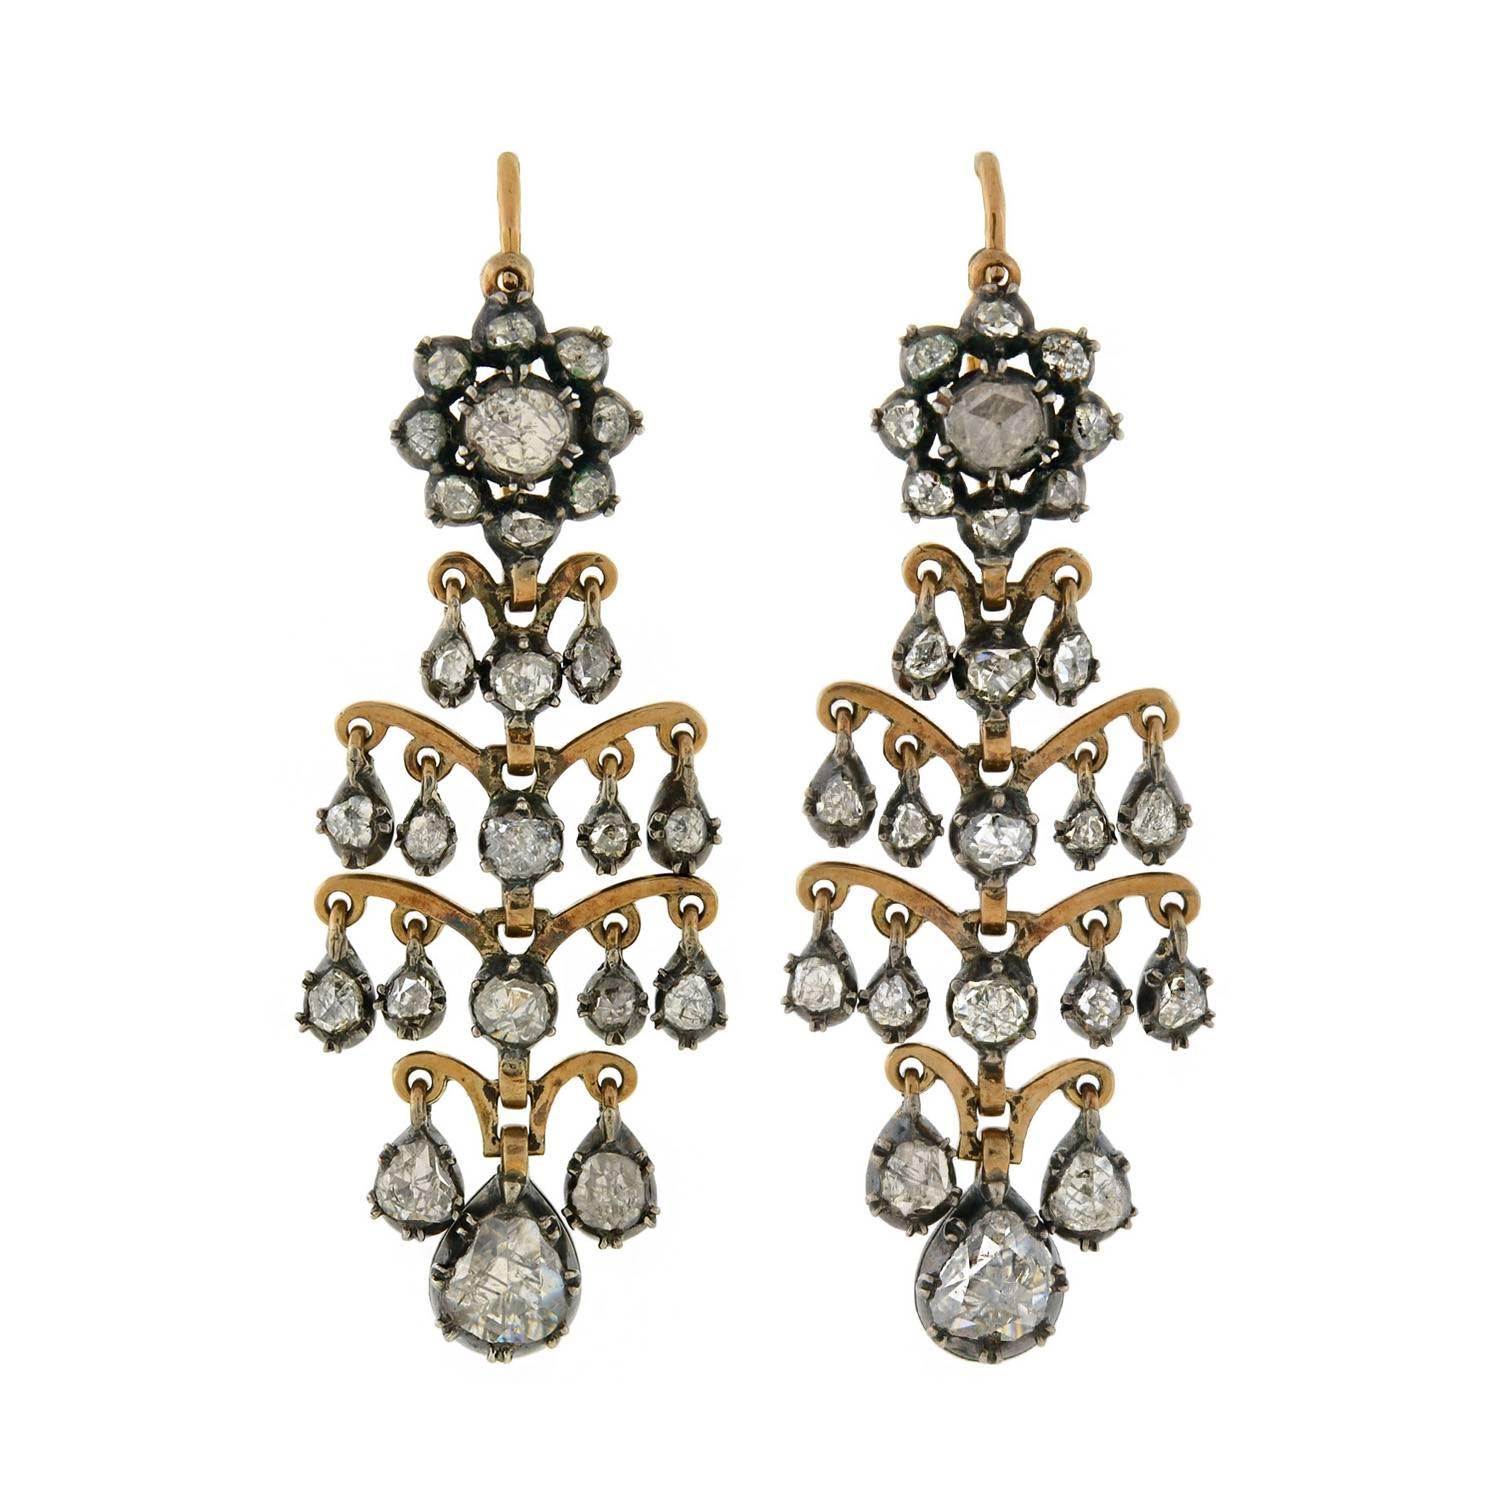 Antique French Dramatic Rose Cut Diamond Earrings 